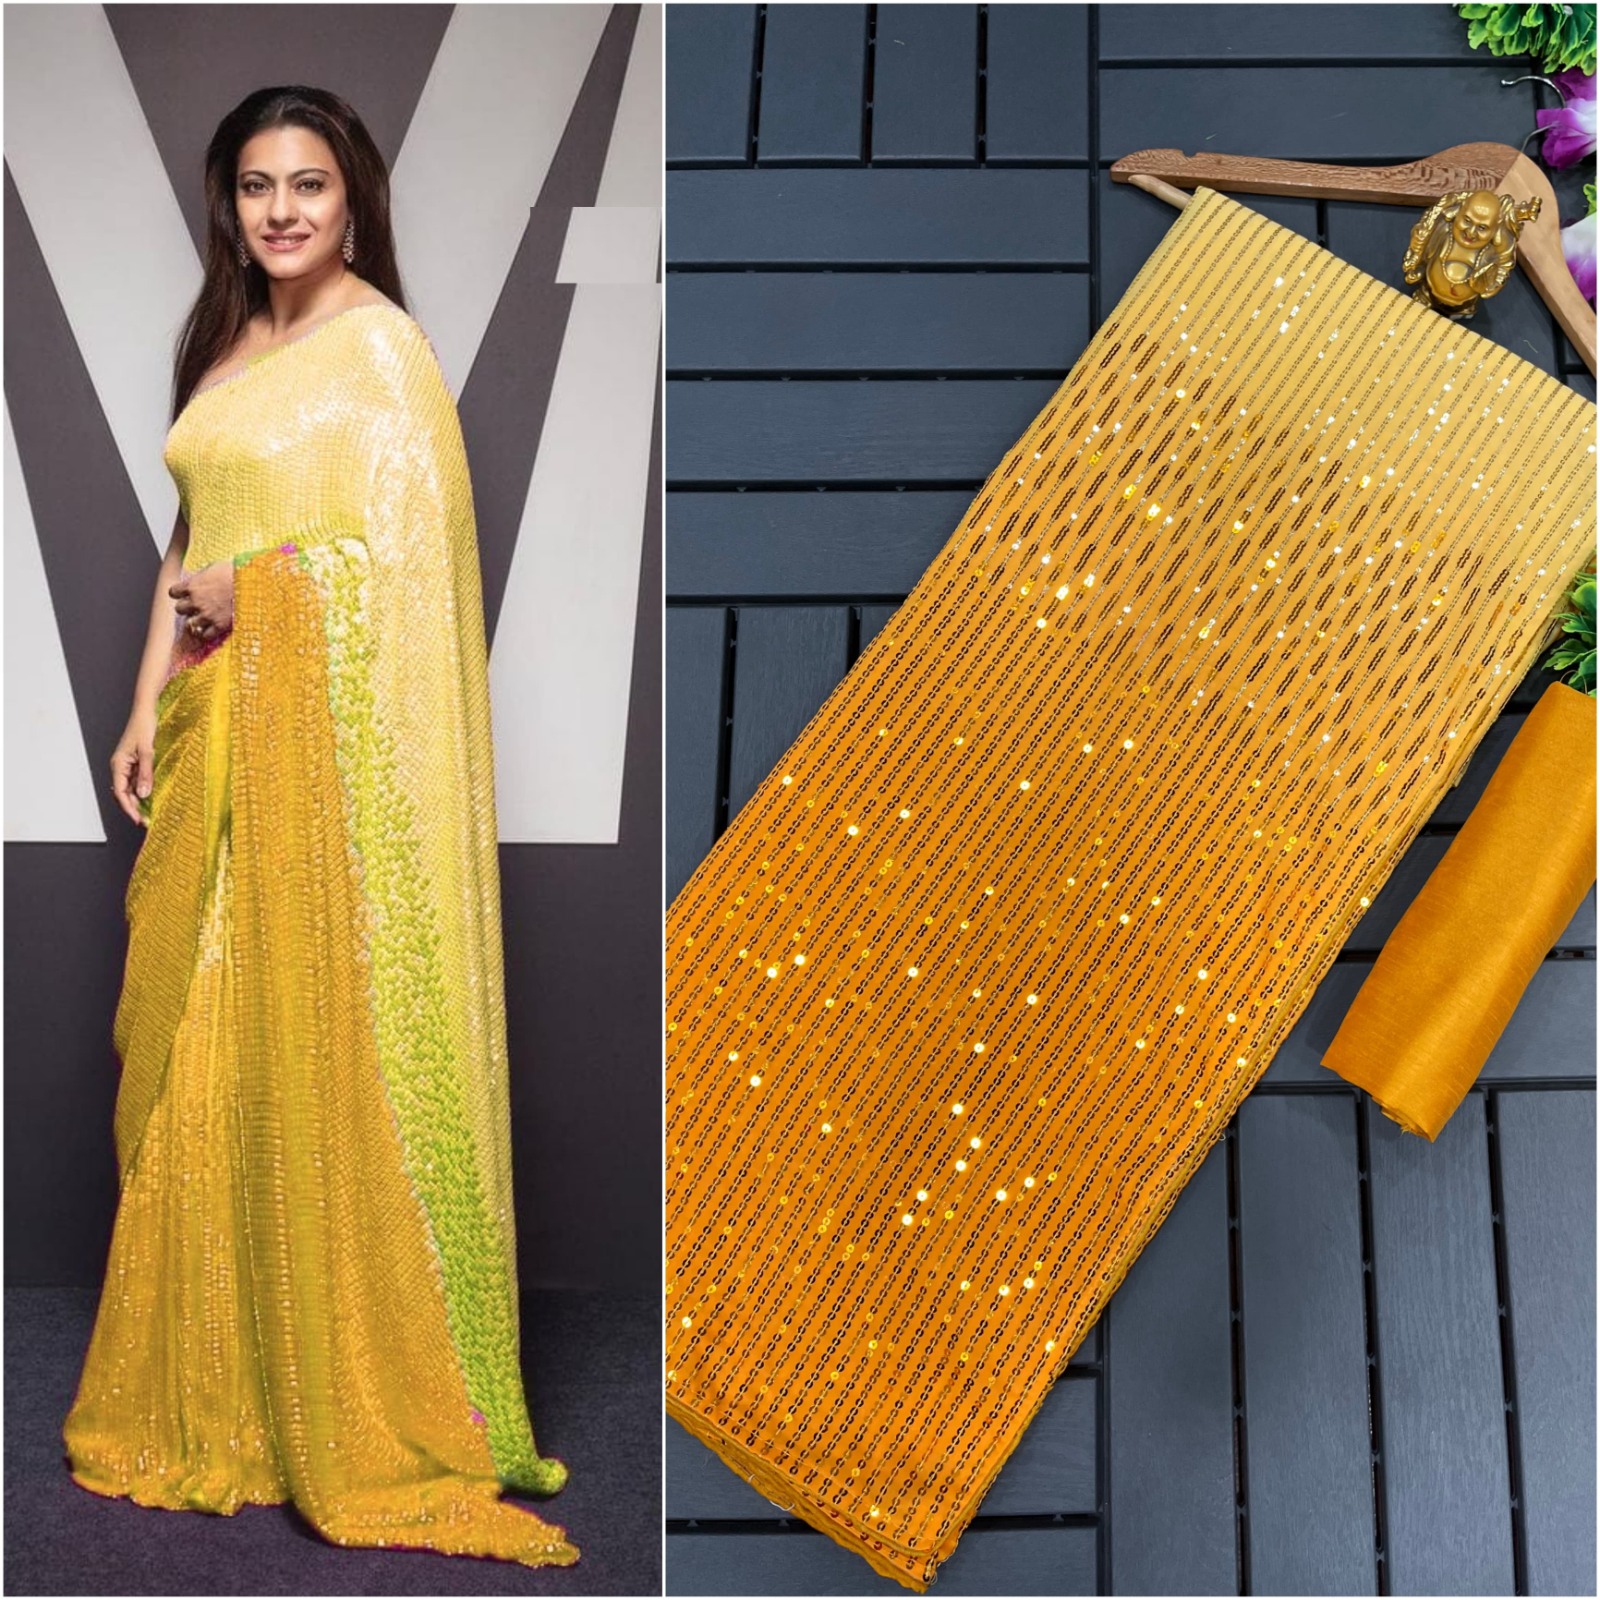 New Launching Bollywood Block Buster Sequins Sari for online sale